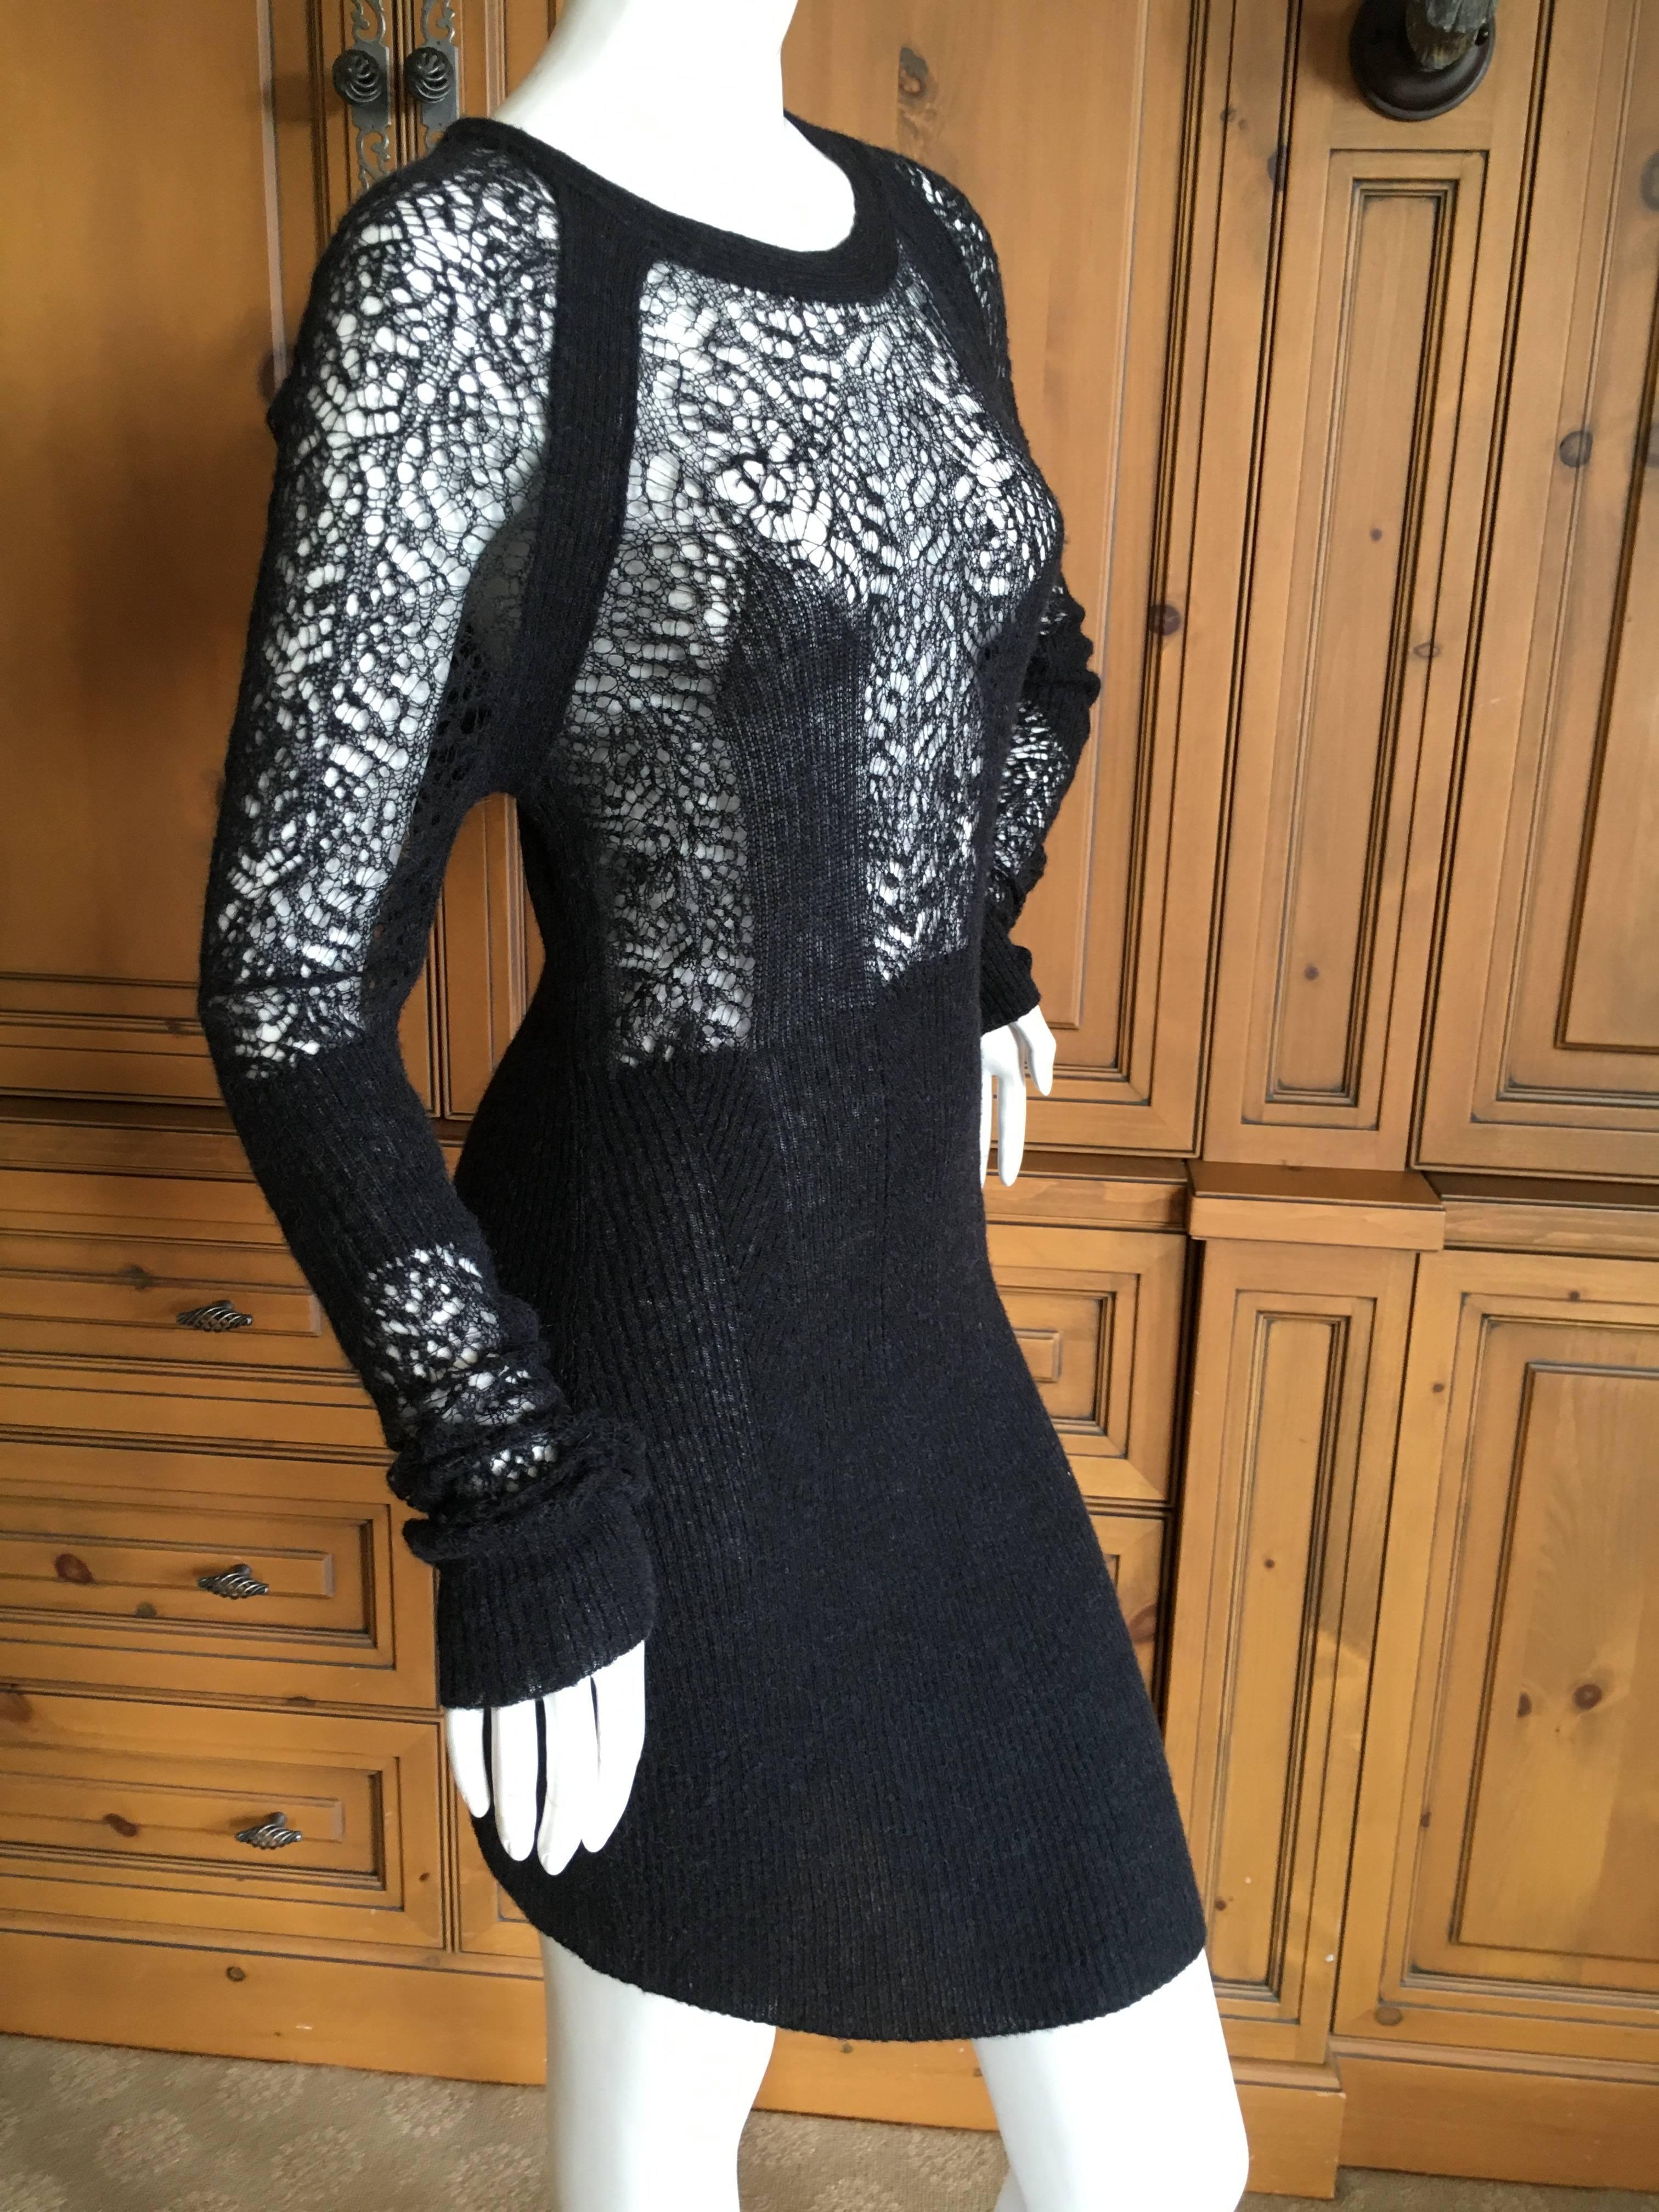 MM6 Maison Martin Margiela Sheer Knit Cocktail Dress In Excellent Condition For Sale In Cloverdale, CA